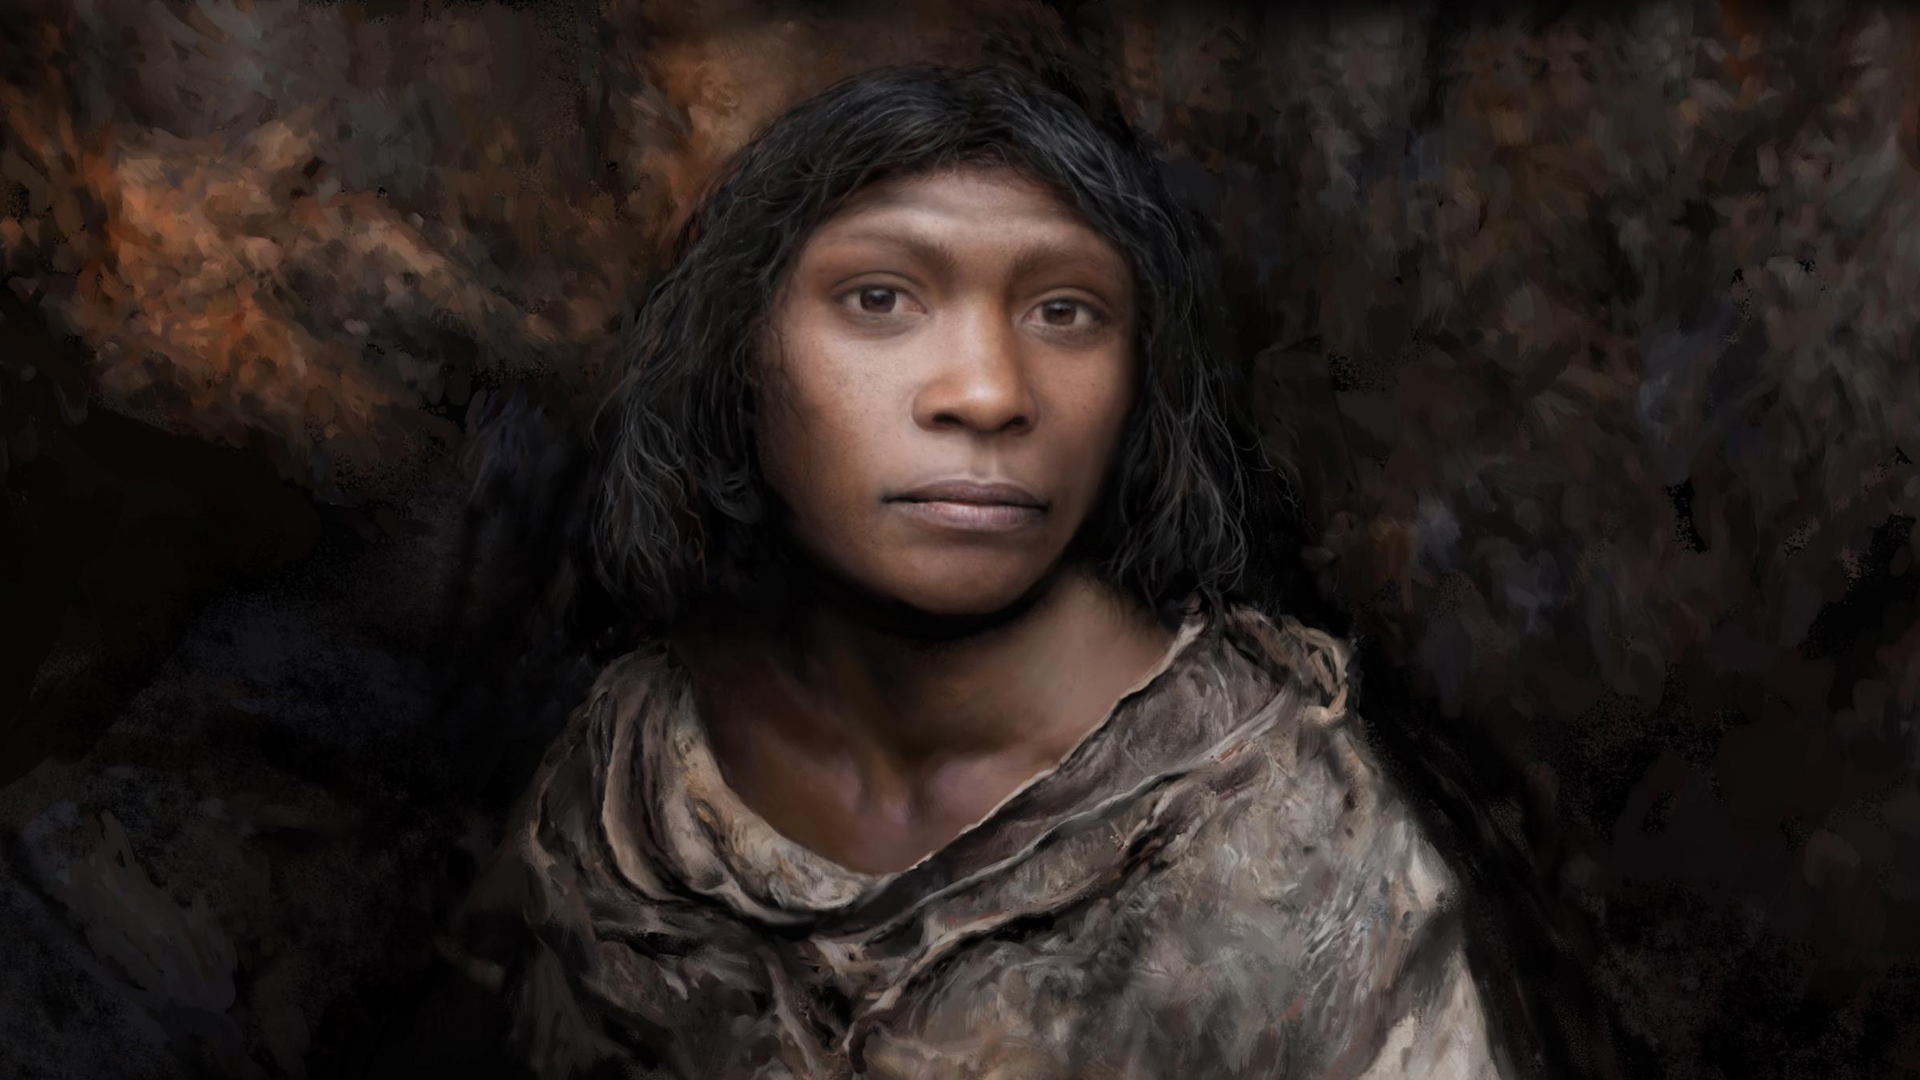 Prehistoric cannibal victim found in image